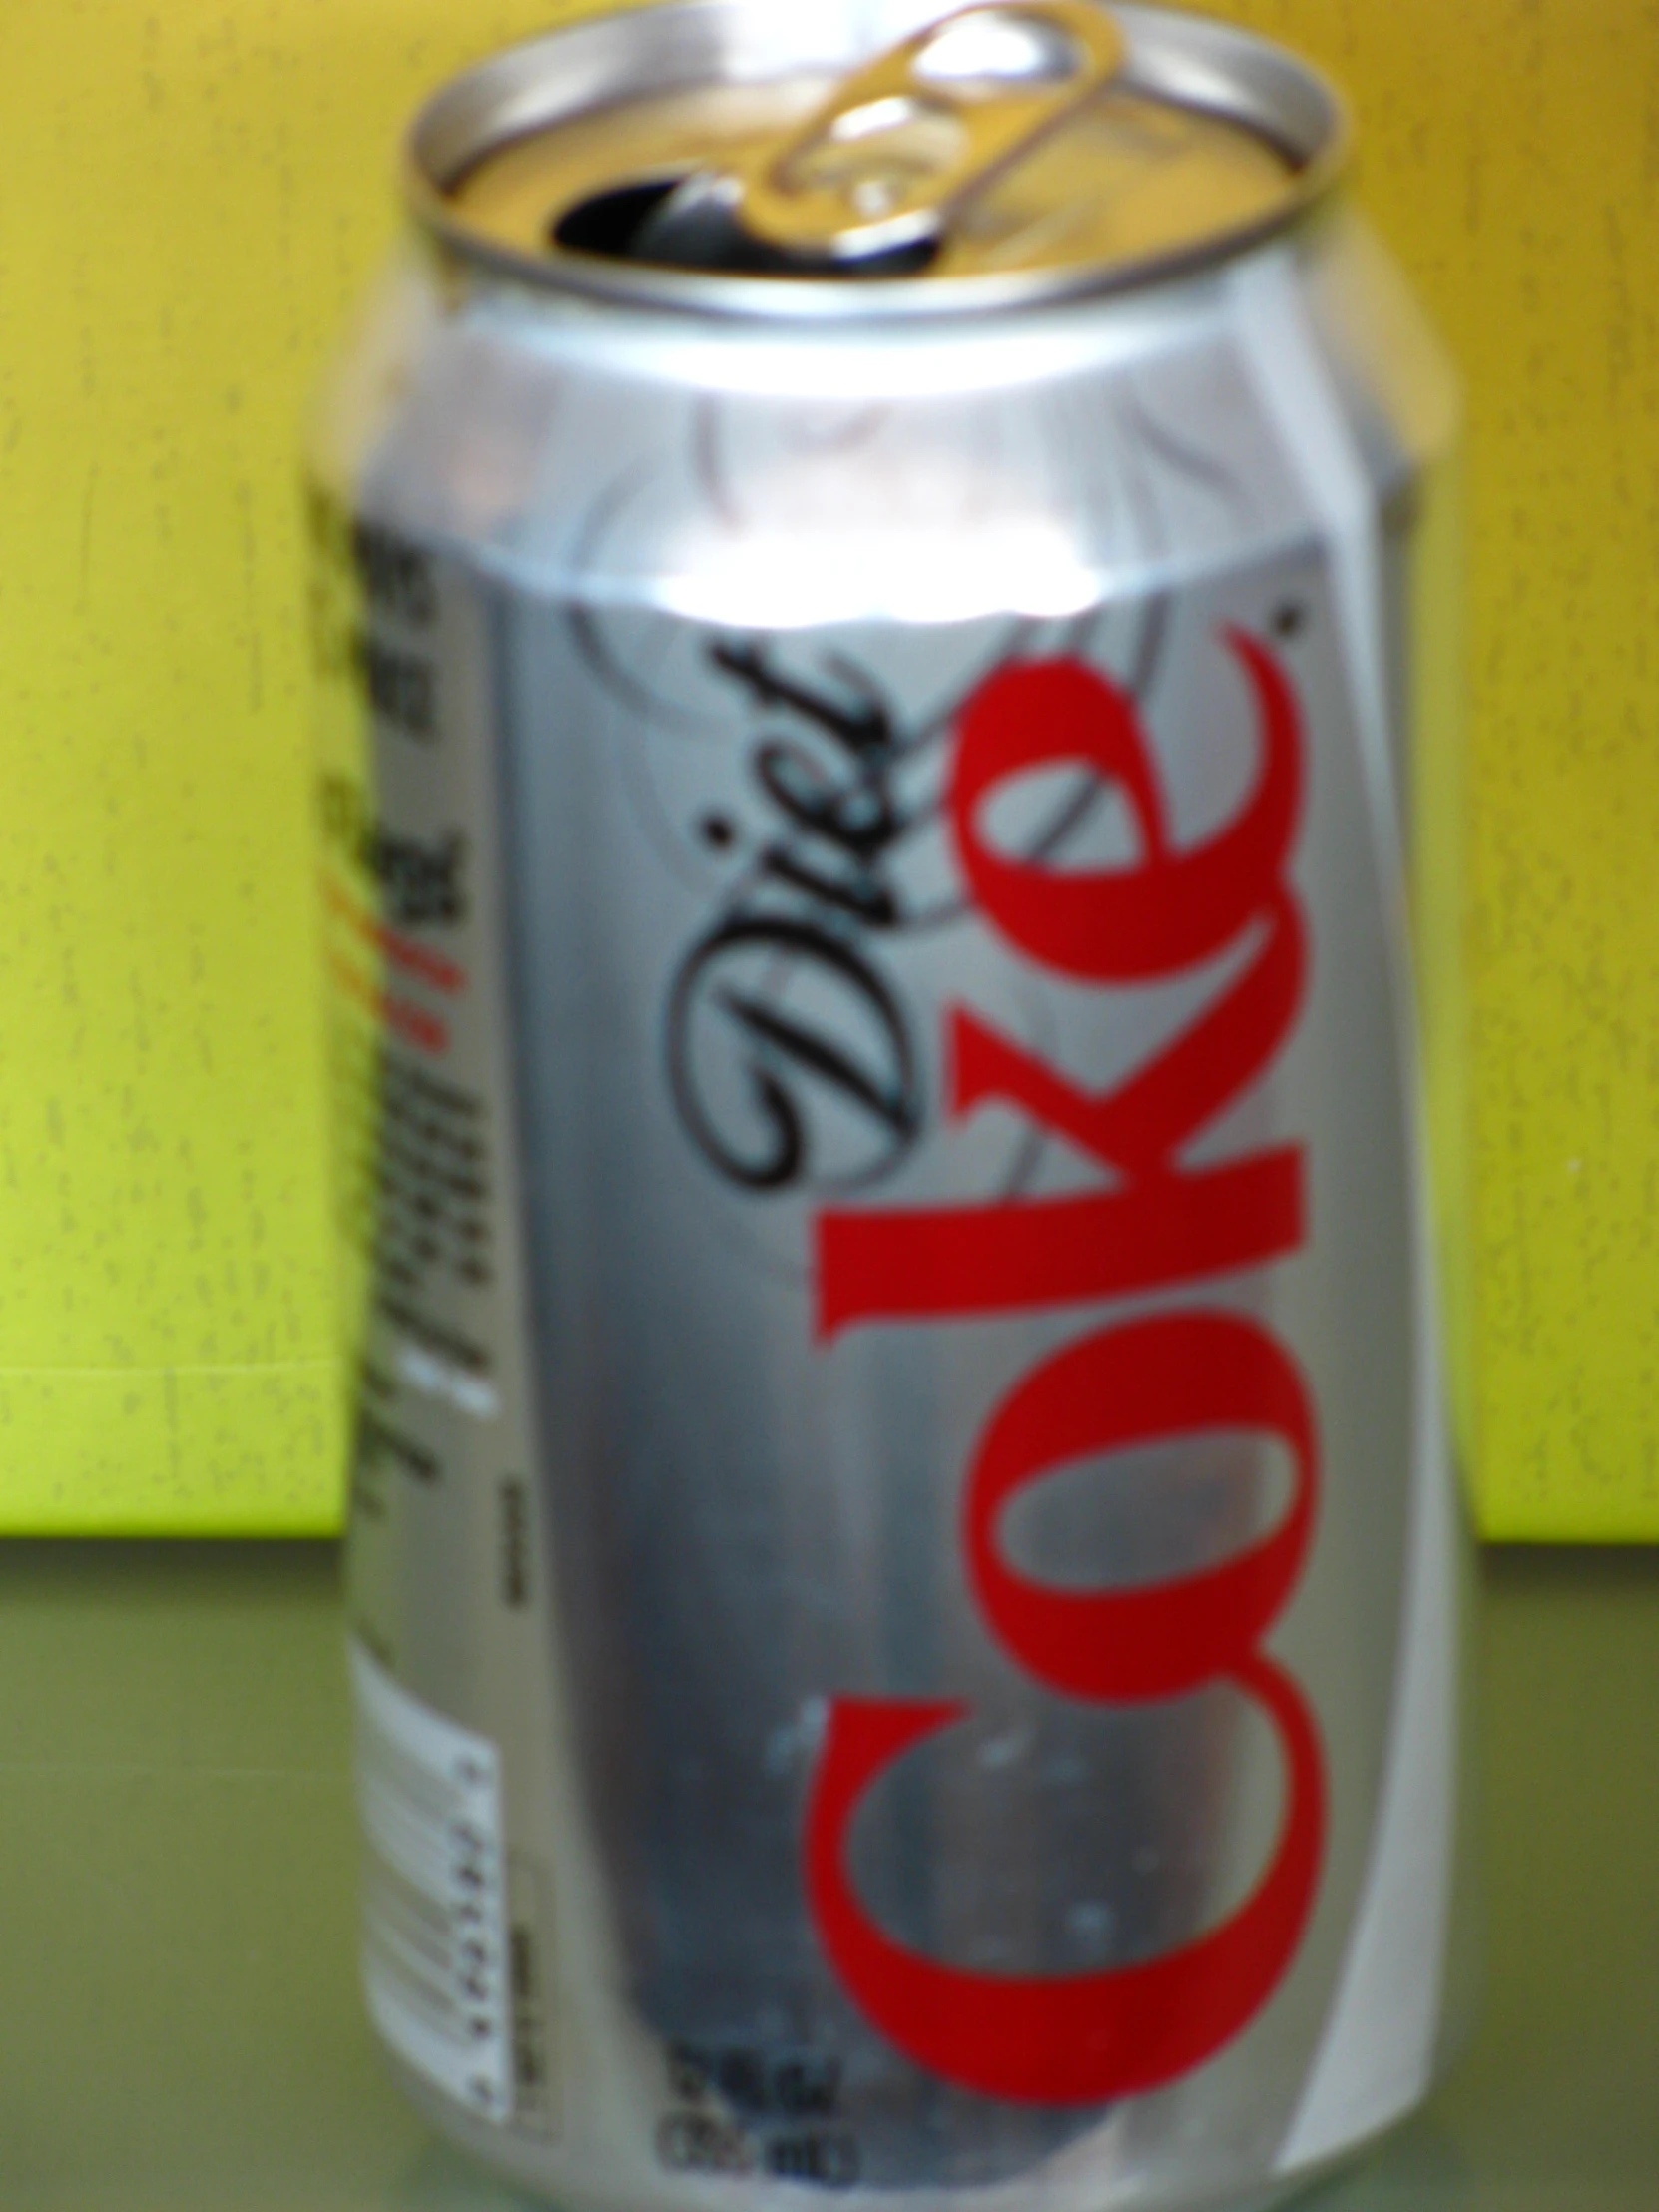 the can of coke has a bright red lettering